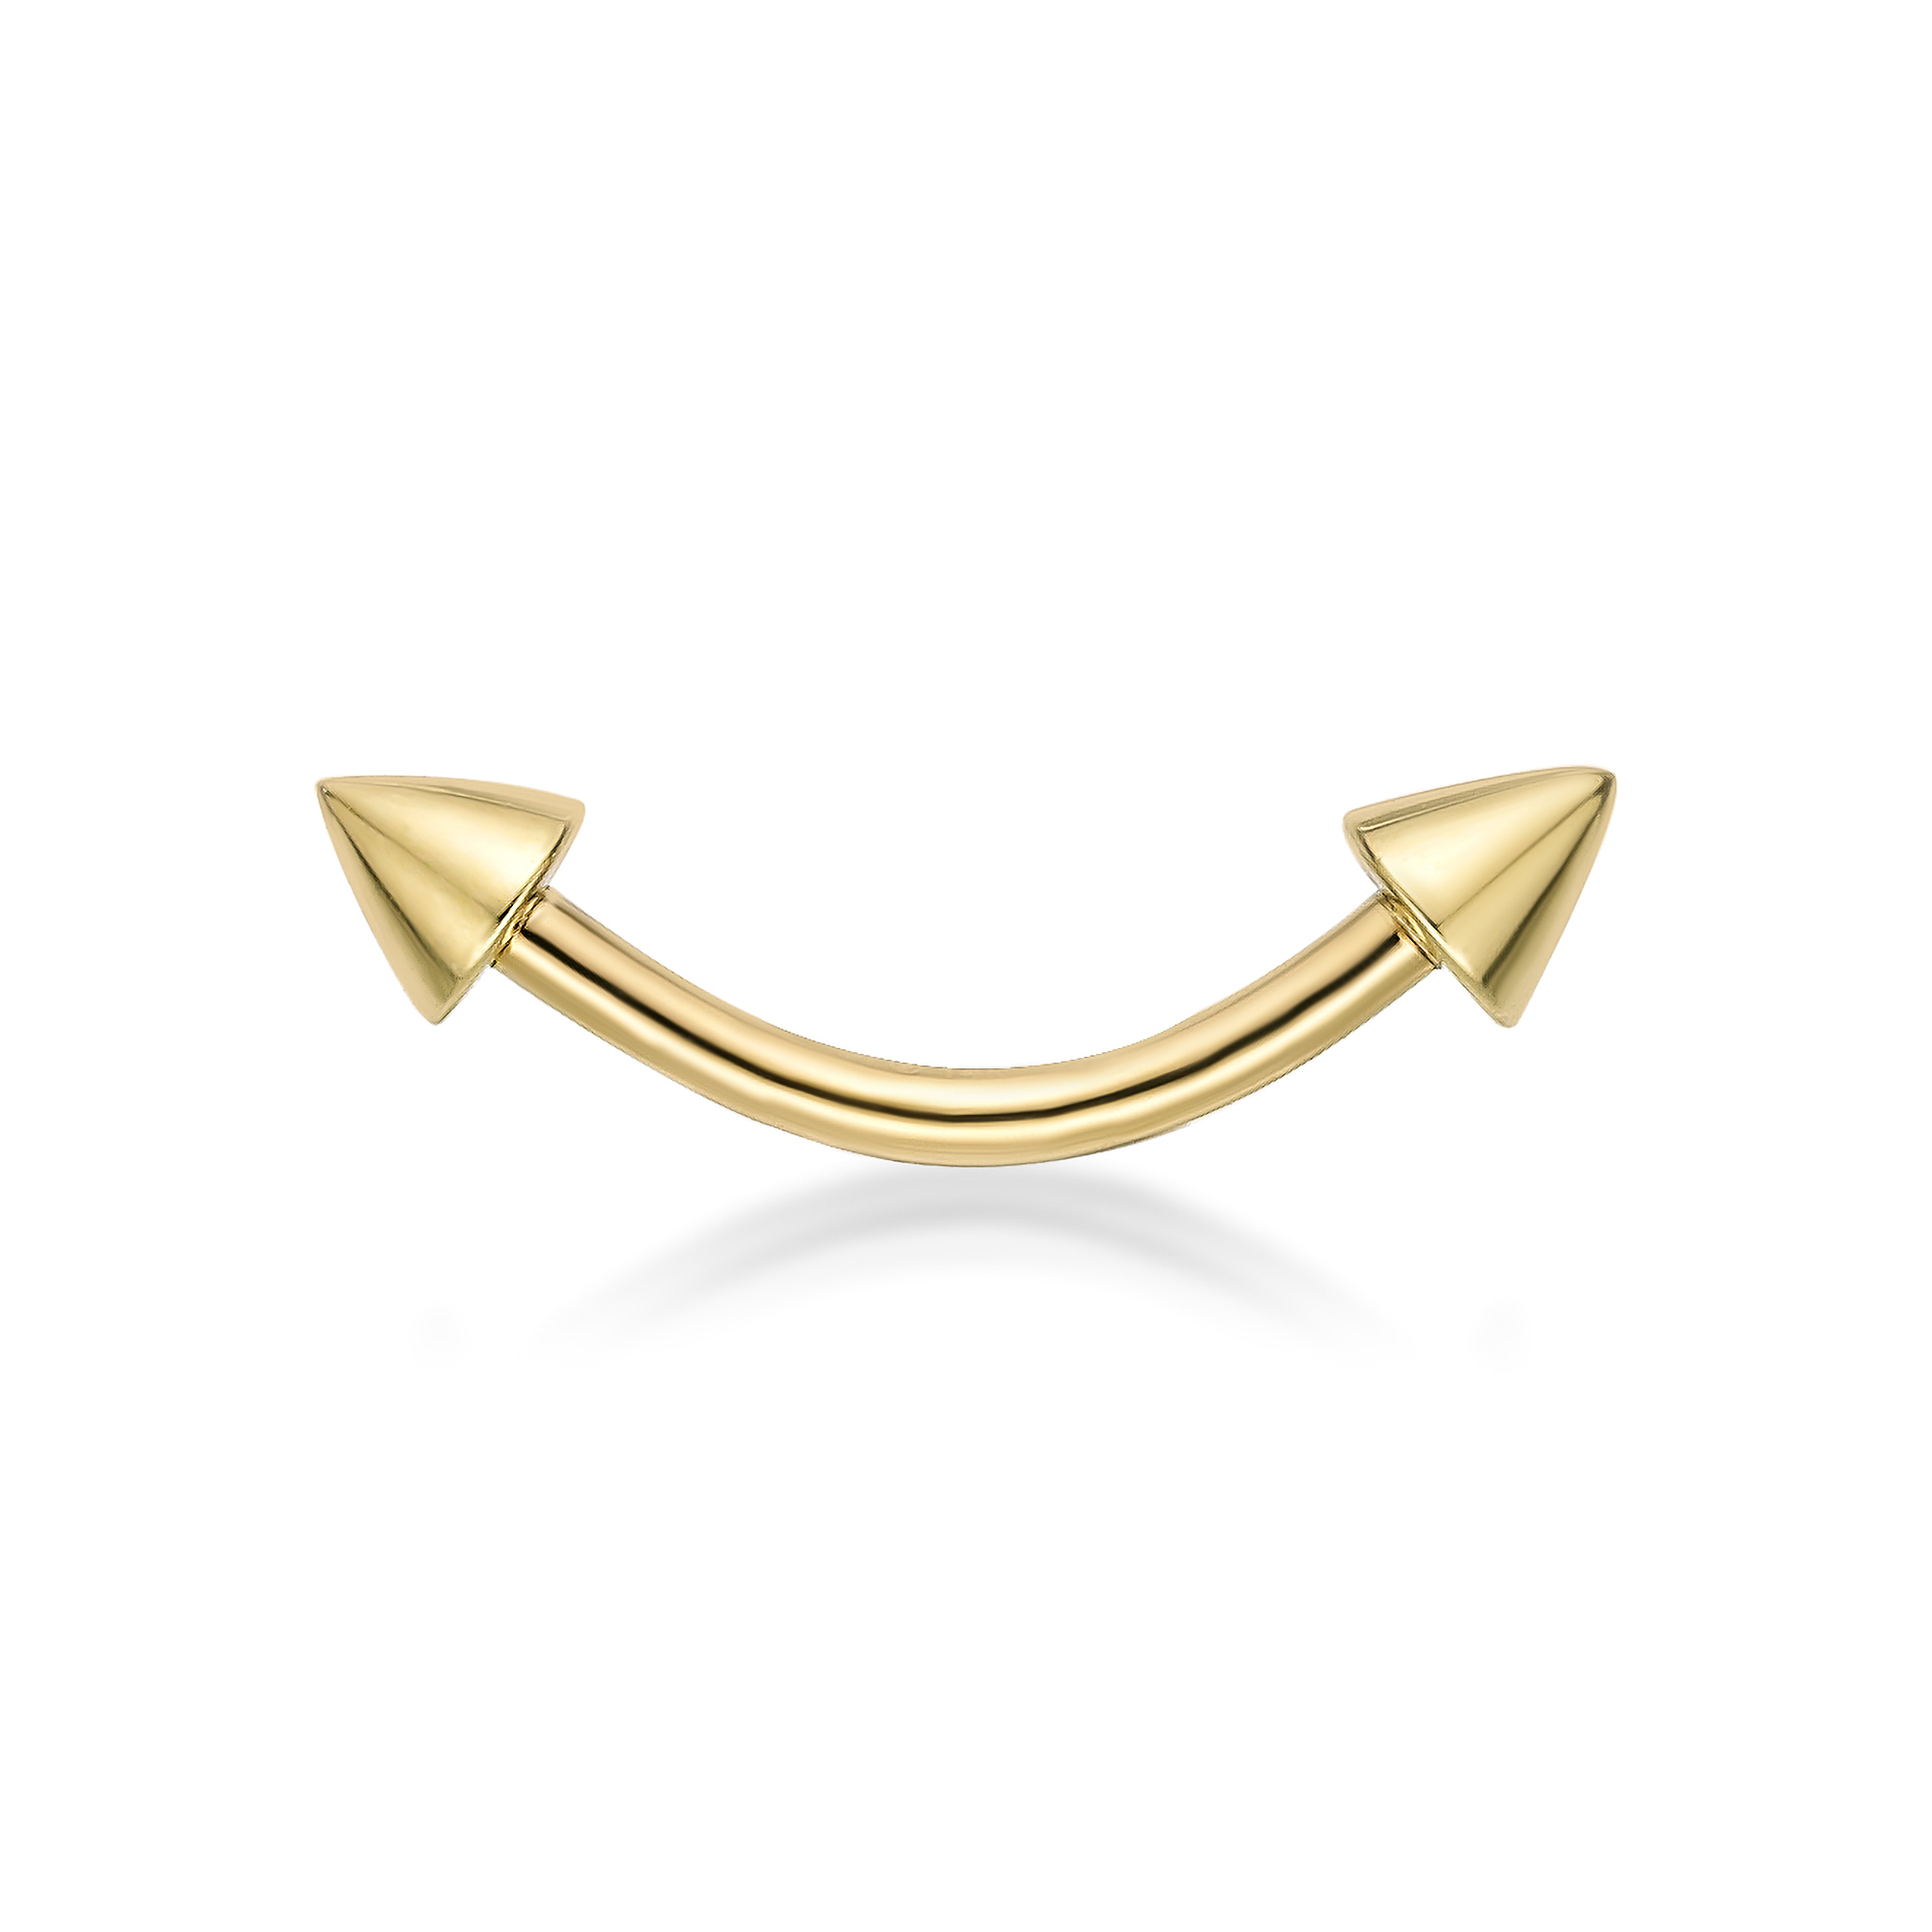 16 Gauge 14K Yellow Gold Curved Barbell Eyebrow Ring with Spikes, 3/8